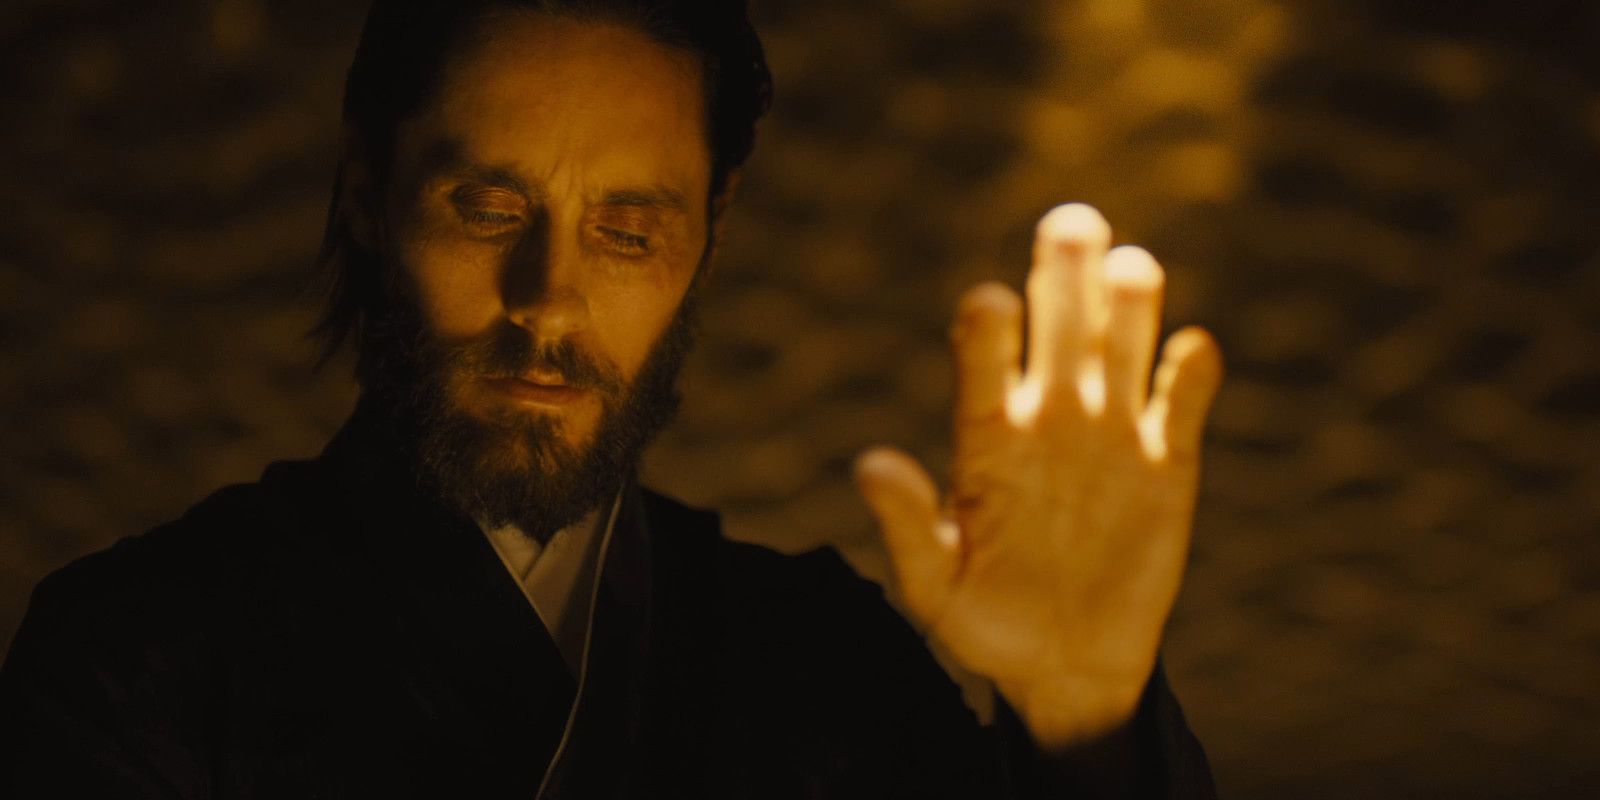 Niander Wallace holds up his hand in his chamber in Blade Runner 2049